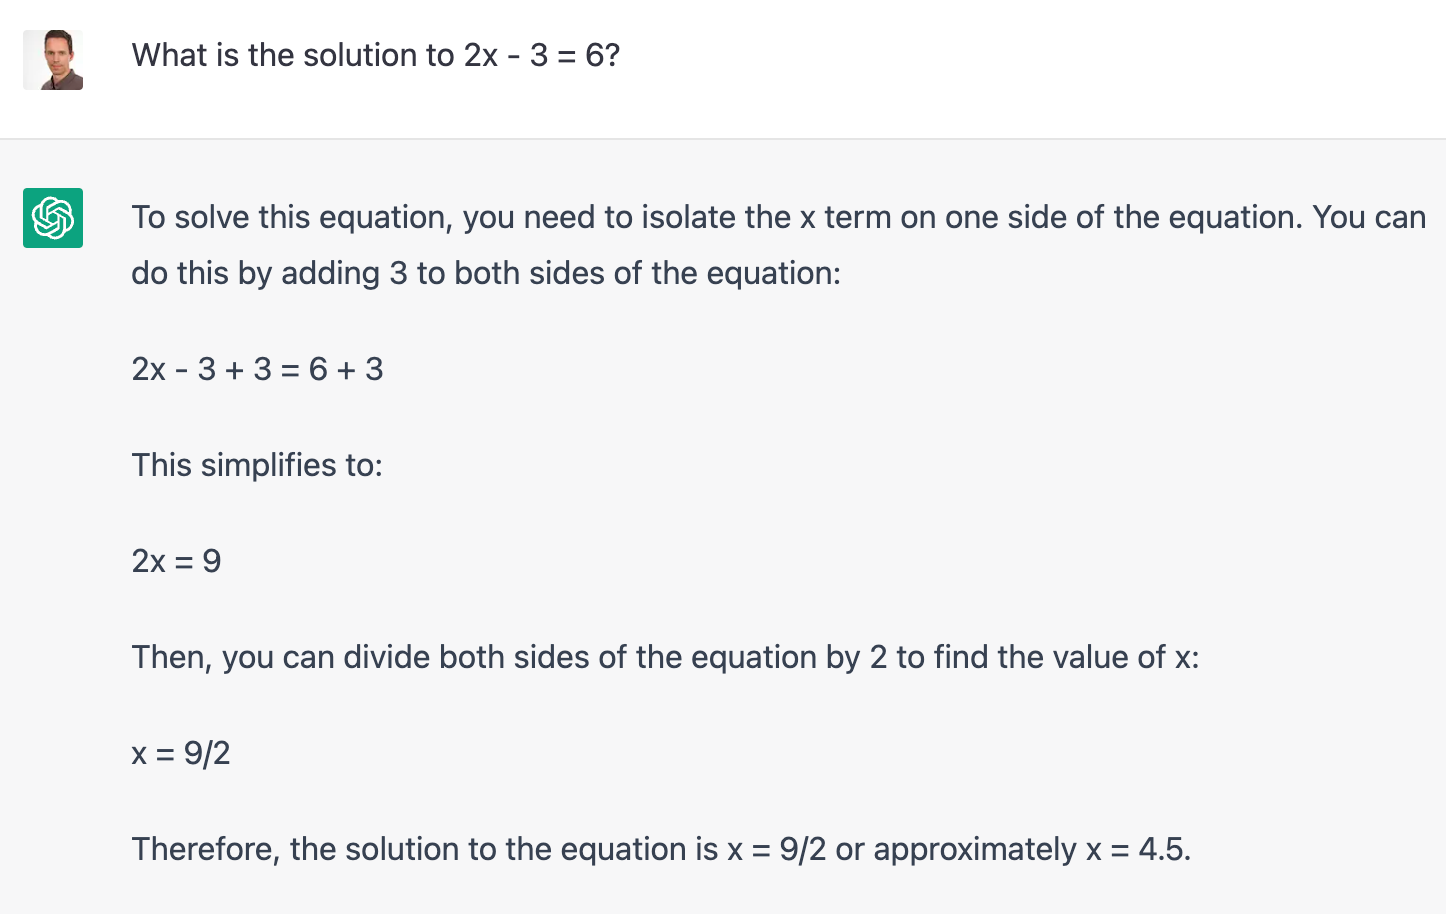 The solution to 2x - 3 = 6 is x = 4.5. To solve this equation, we can start by adding 3 to both sides, which gives us 2x = 9. Then, we can divide both sides by 2 to get x = 4.5. Therefore, the solution to the equation is x = 4.5.